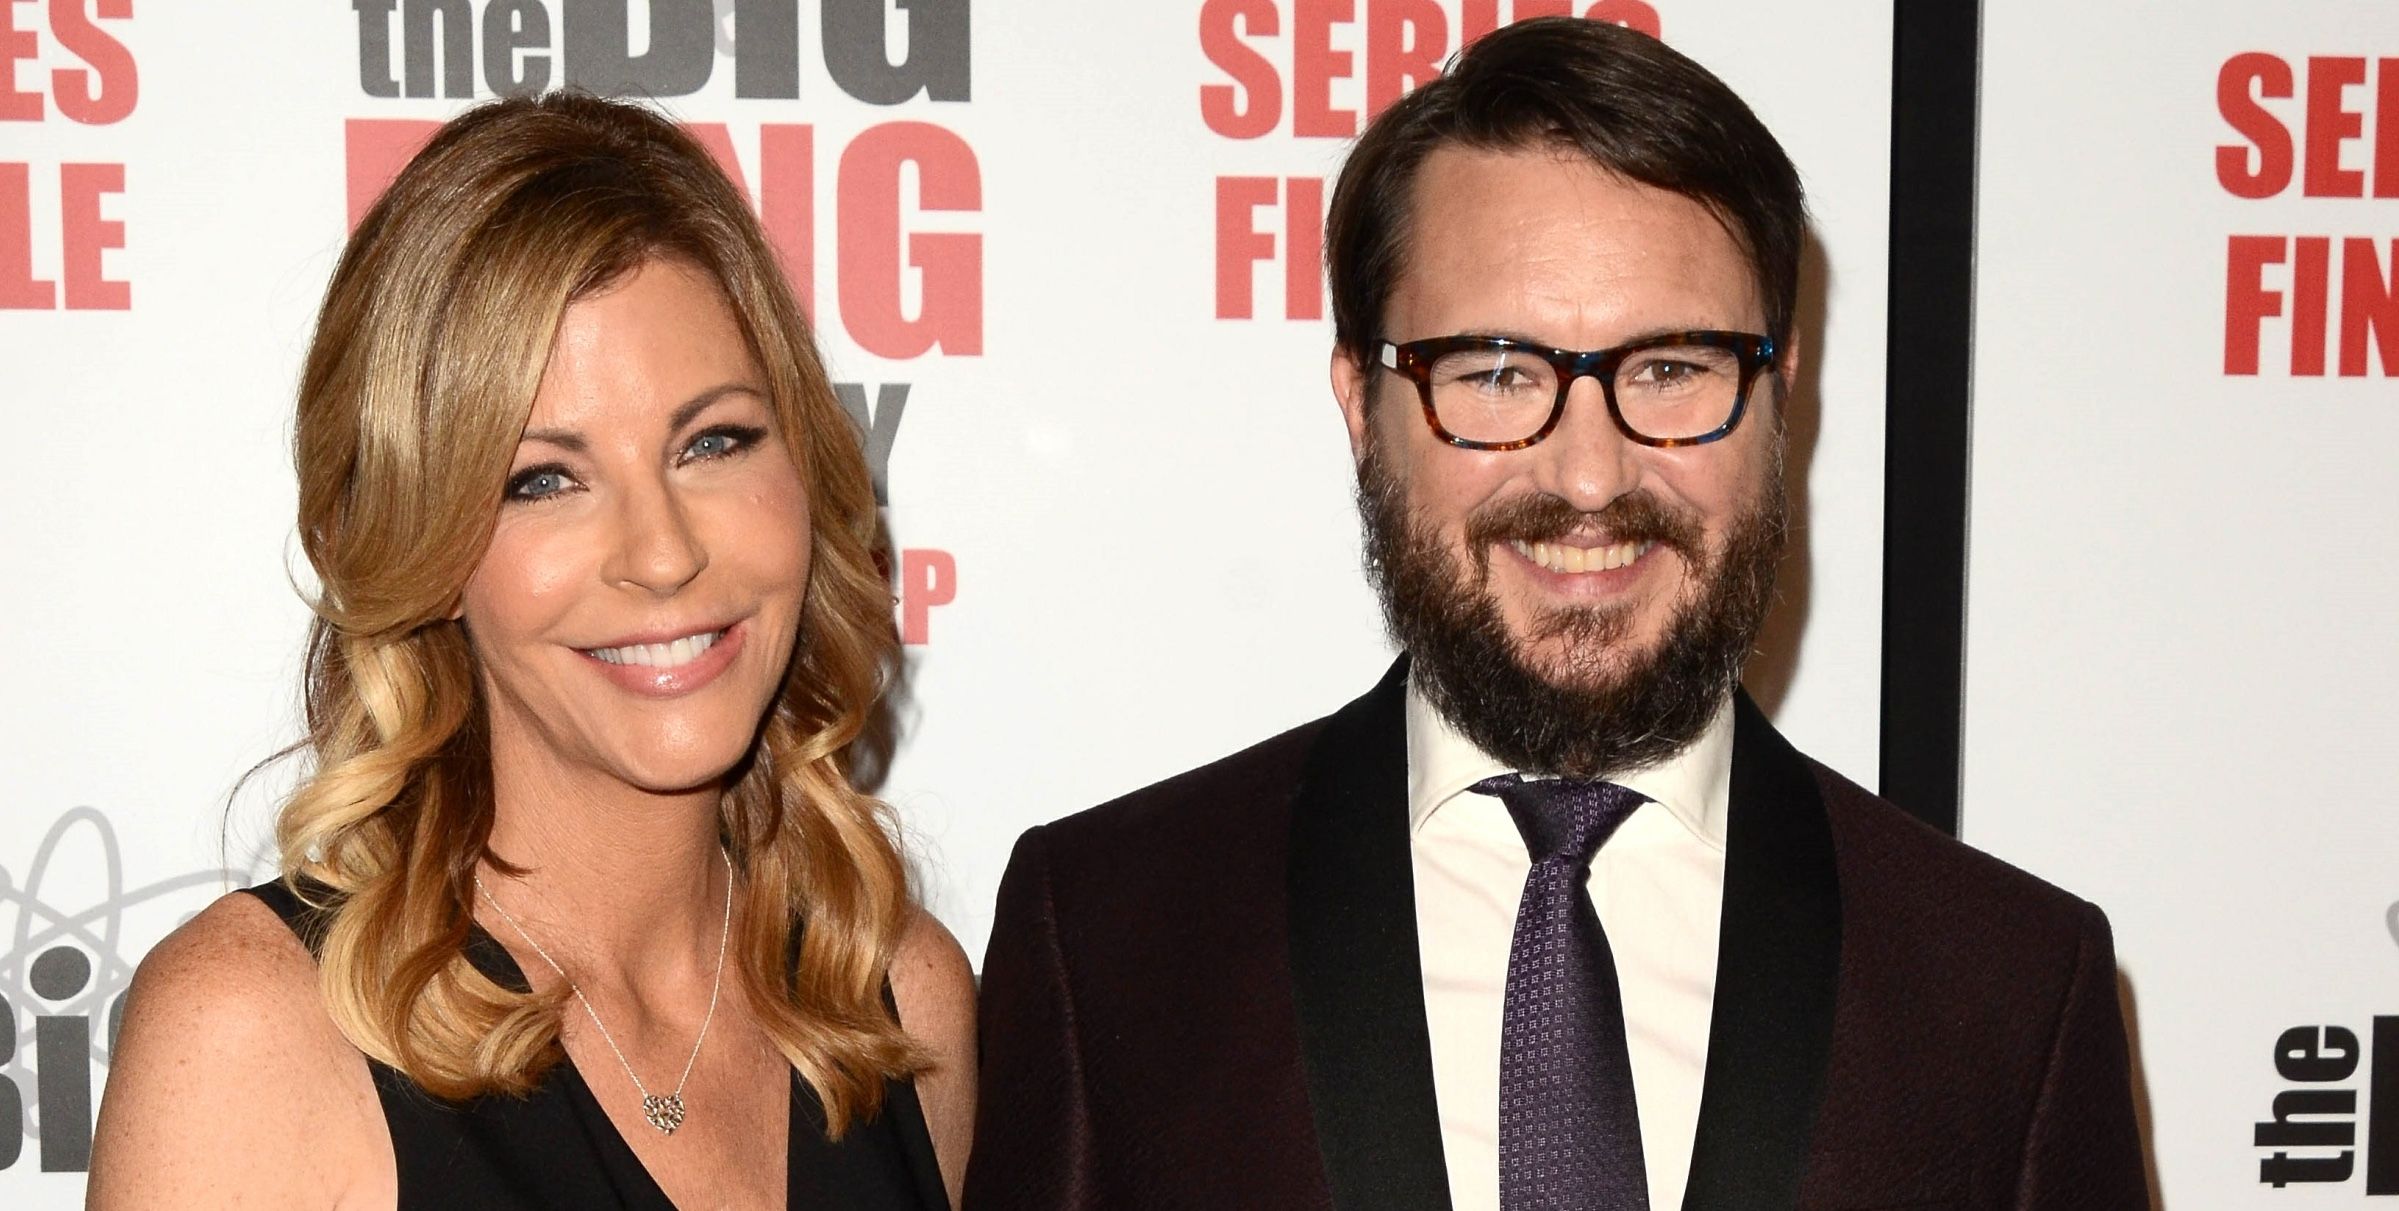 Big Bang Theory's Evil Wil Wheaton Is What The Actor Would Be Without His Wife